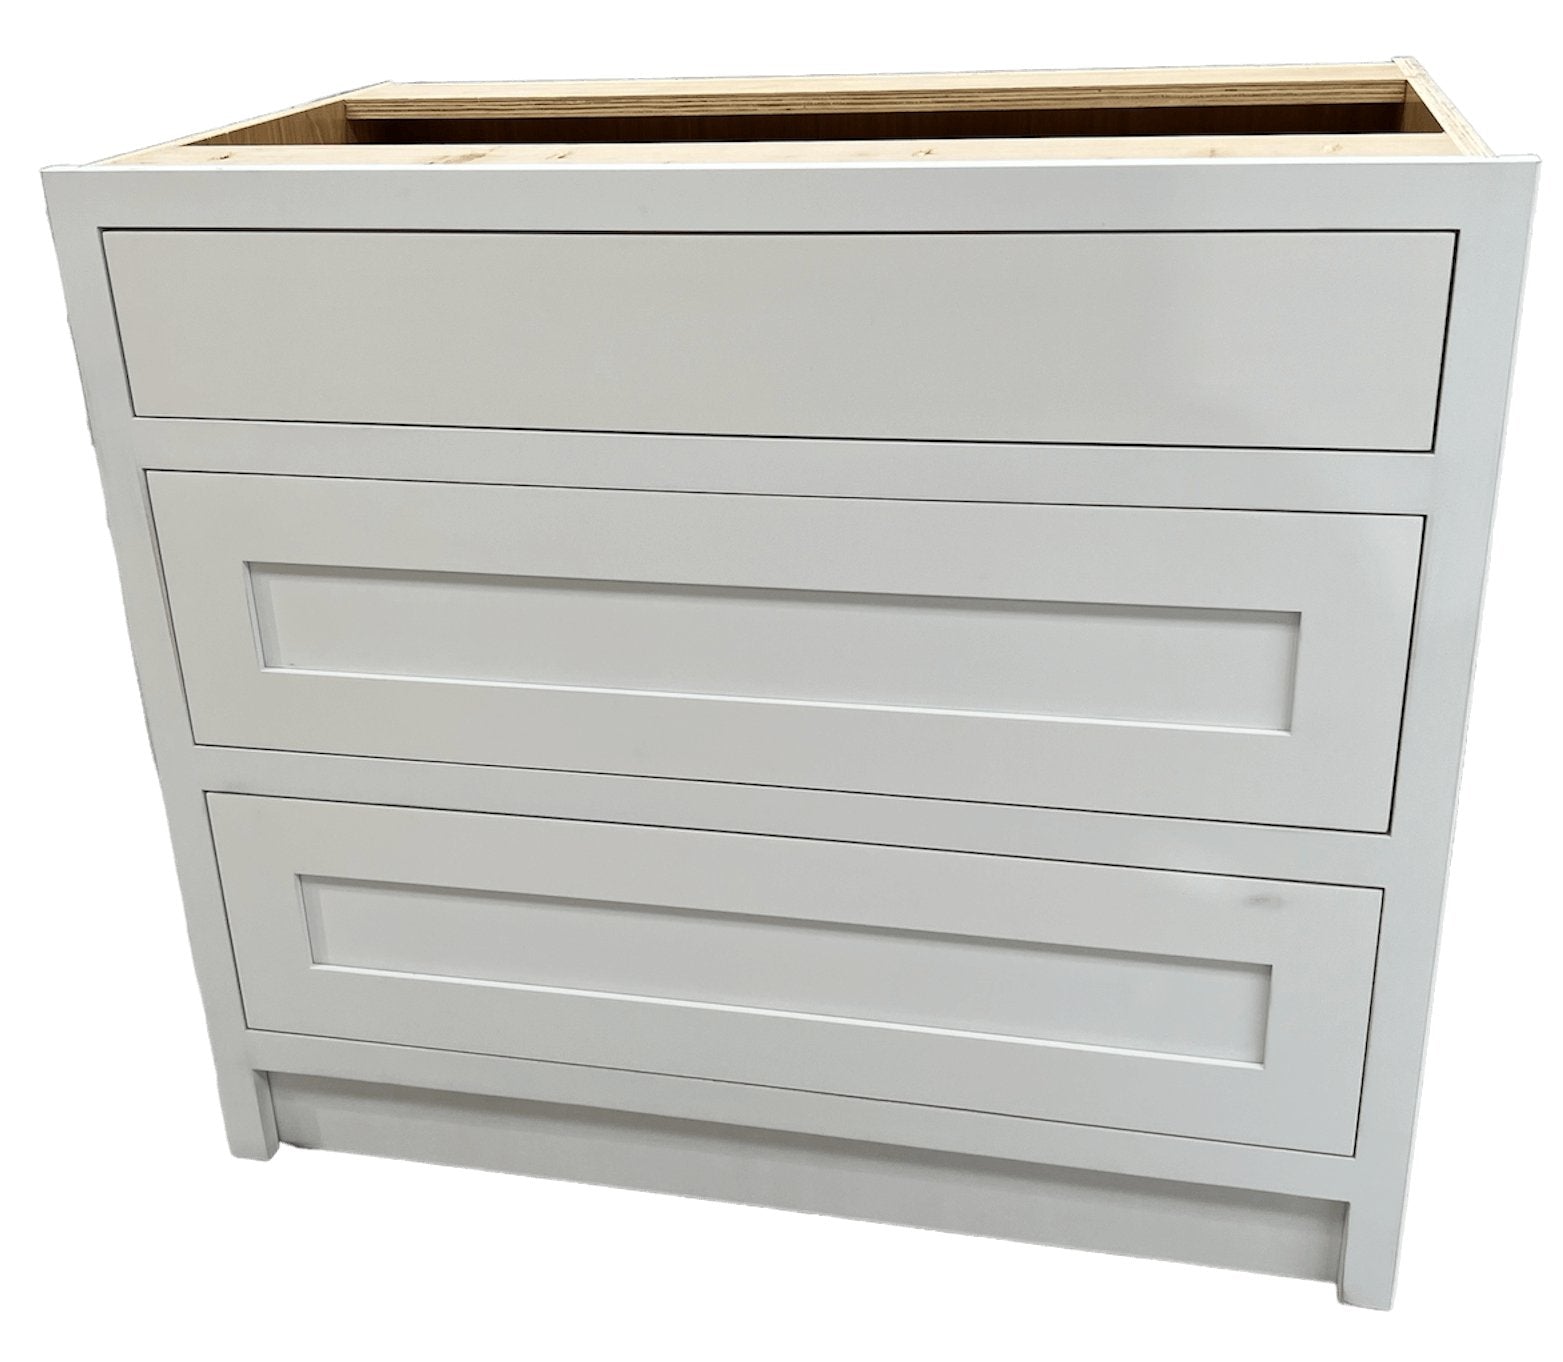 BD3 1000 - 1000mm Wide 3 drawer base unit - Classic Kitchens Direct